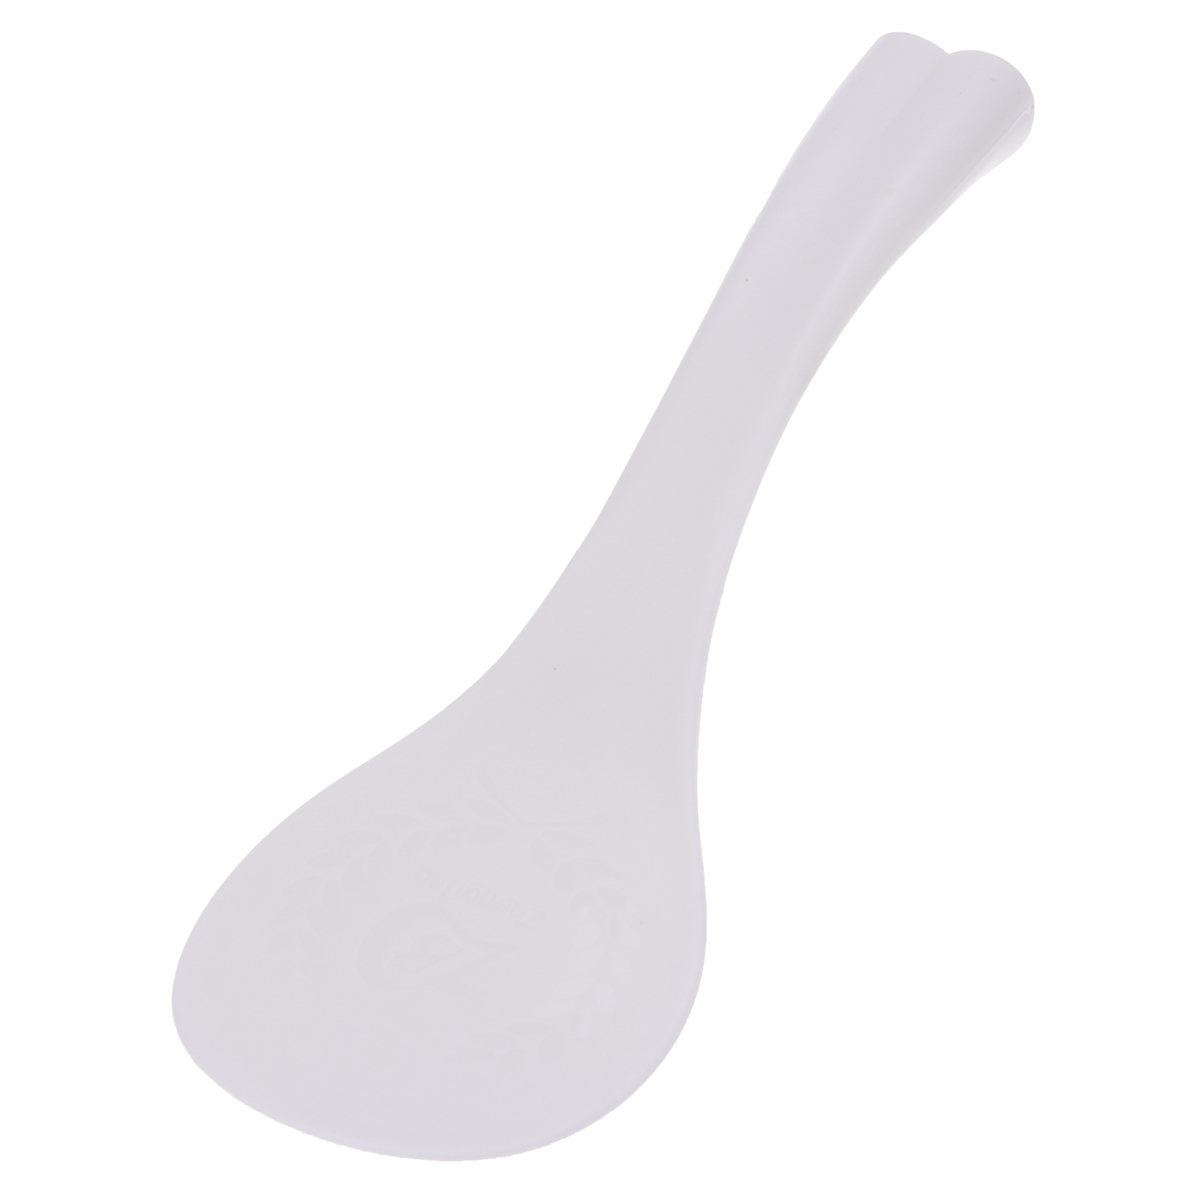 1PC Ladle Spoon Non Stick Heart-shaped Handle Rice Spoon for Kitchen Picnic